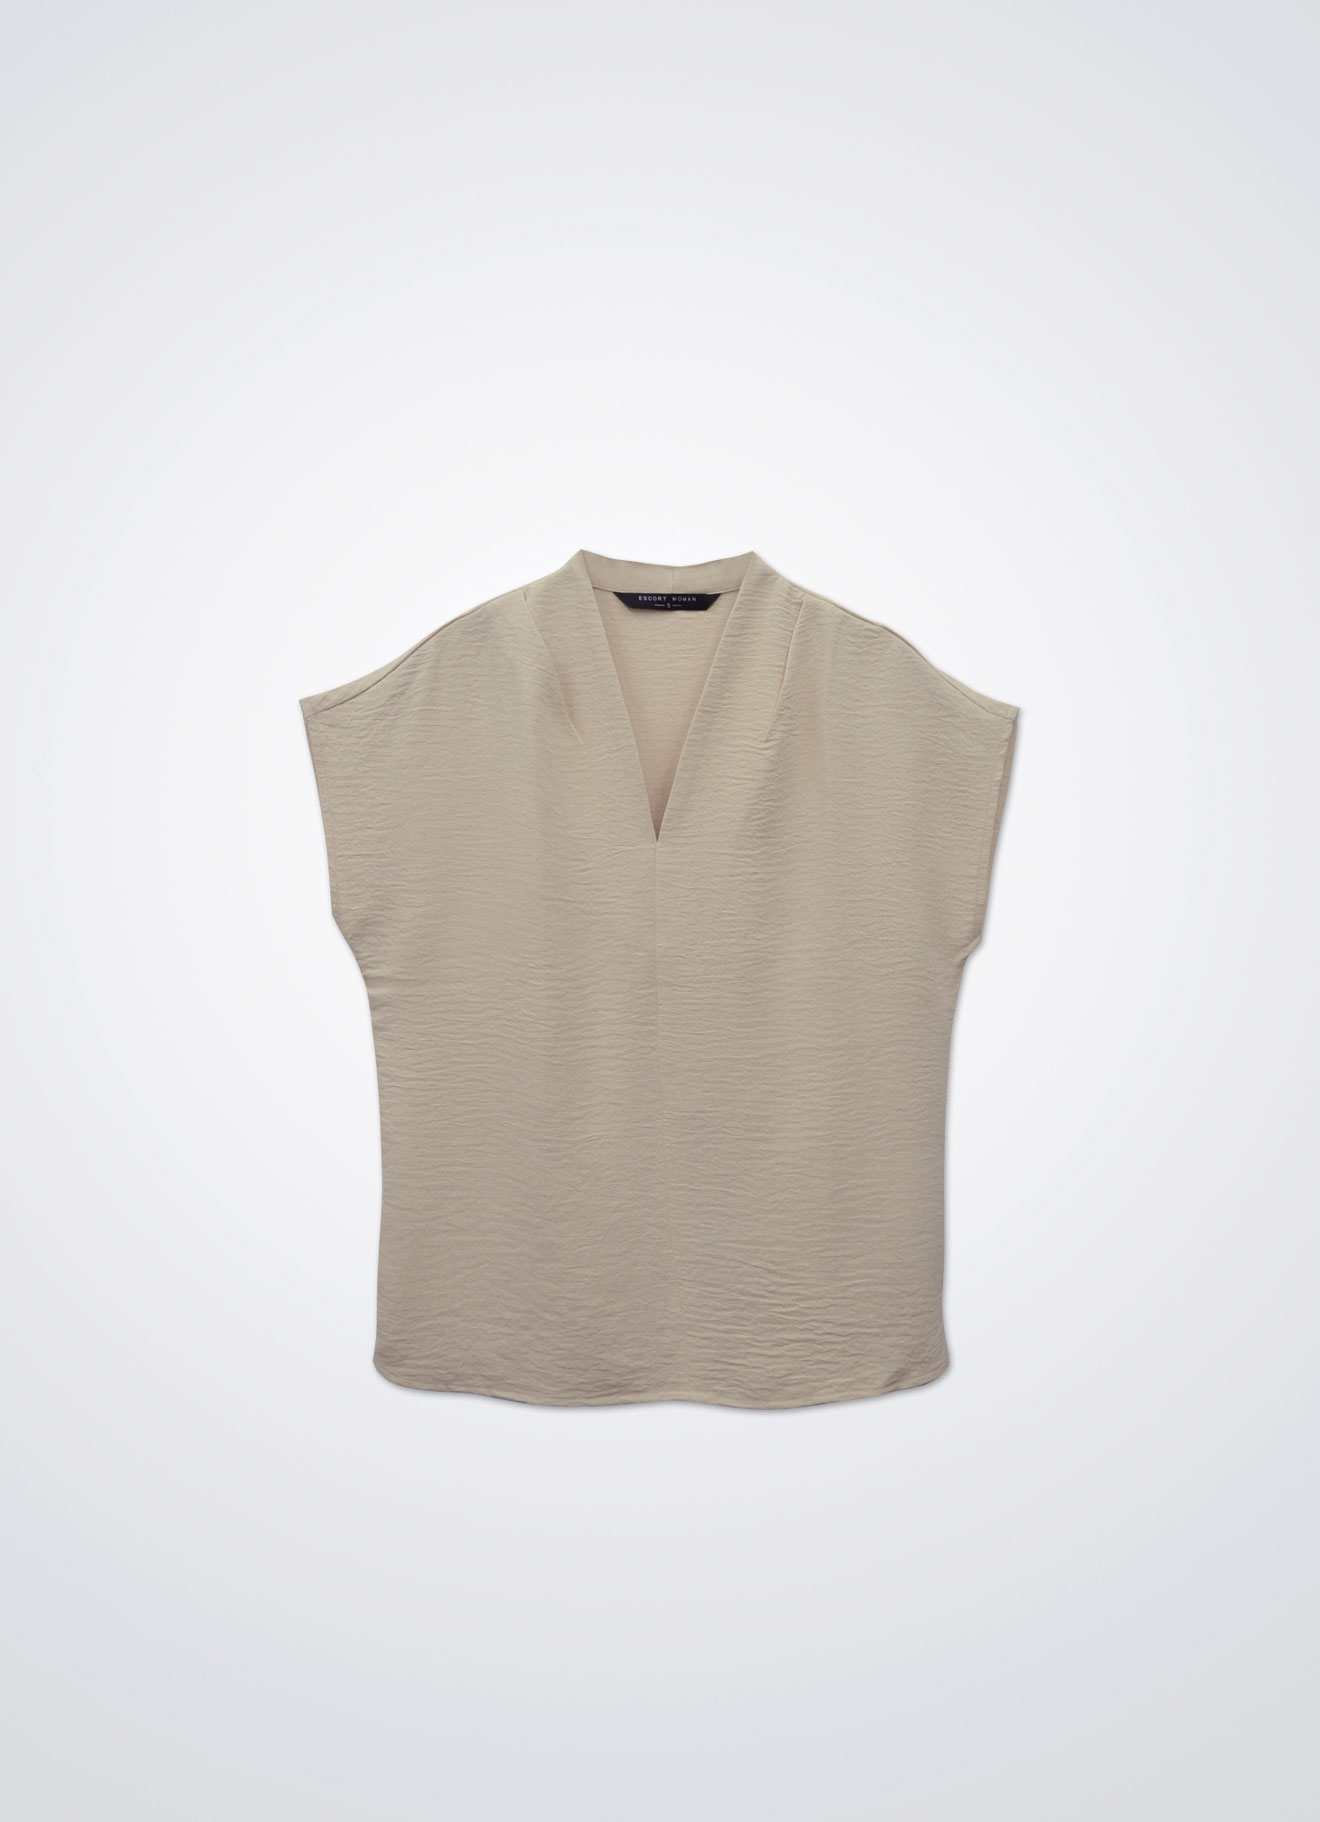 Gray-Sand by Sleeve Top